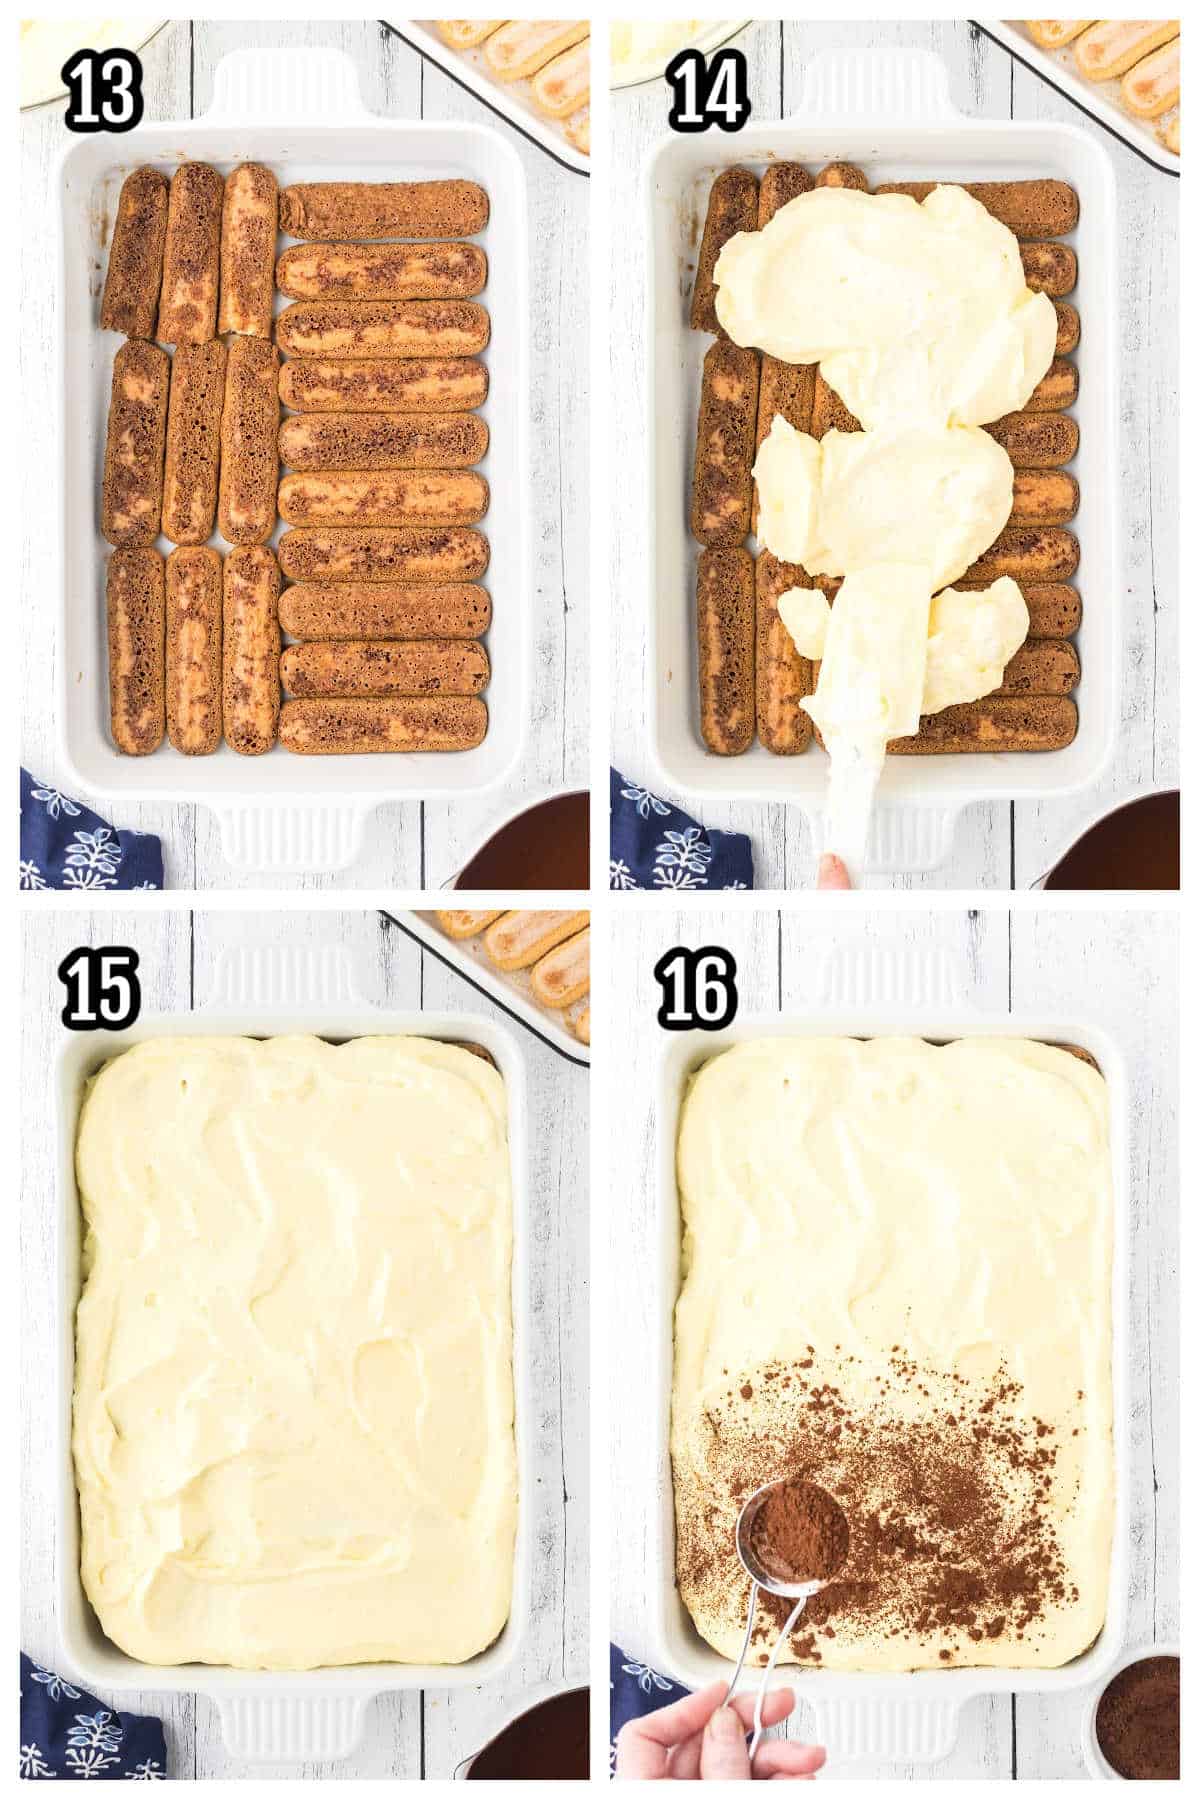 The fourth collage depicts the last four steps to making the coffee-soaked ladyfingers Italian dessert. 